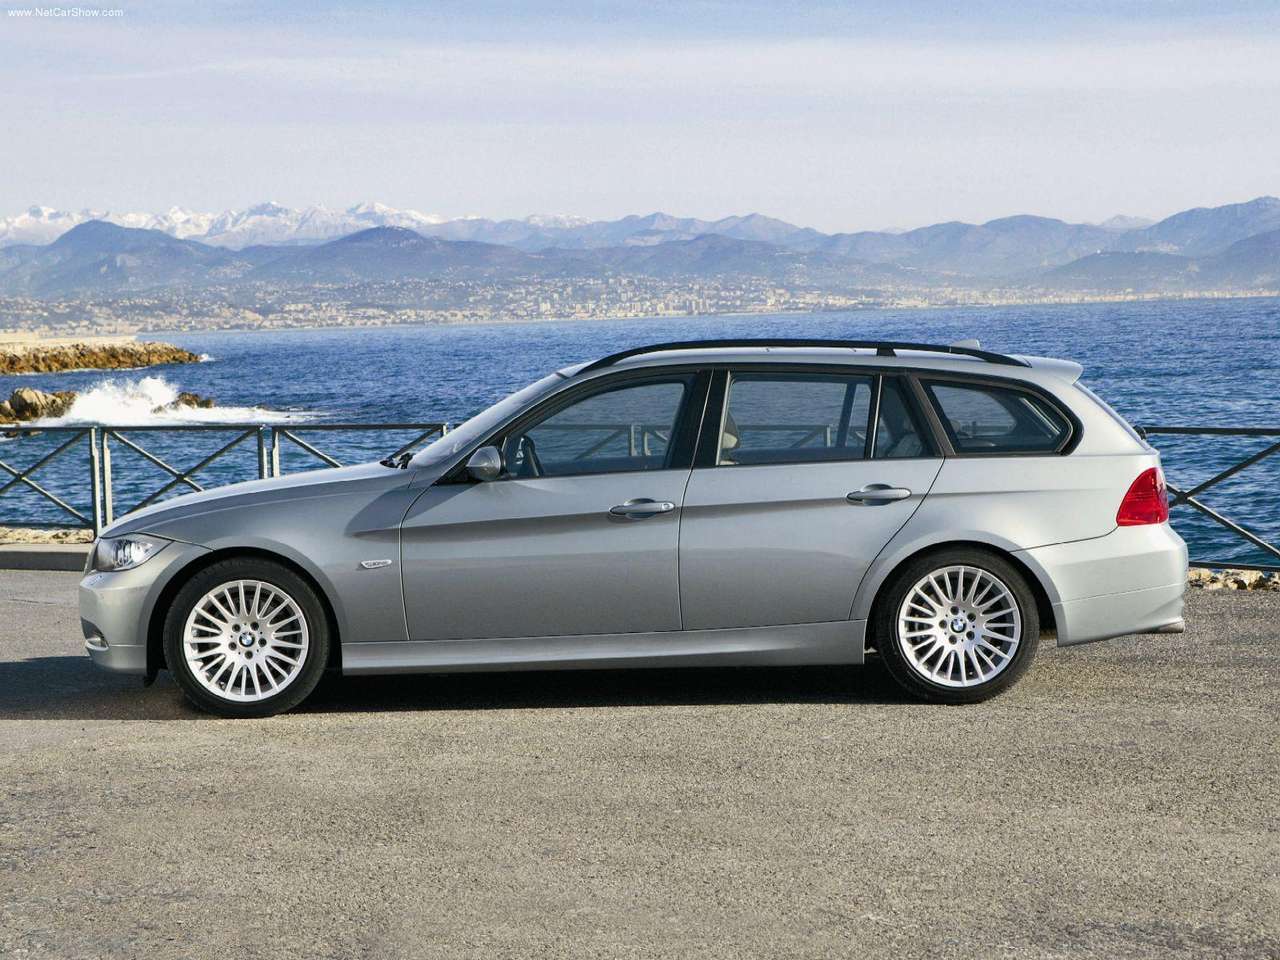 First offered to the market in March 2005, it had quickly become BMW ...